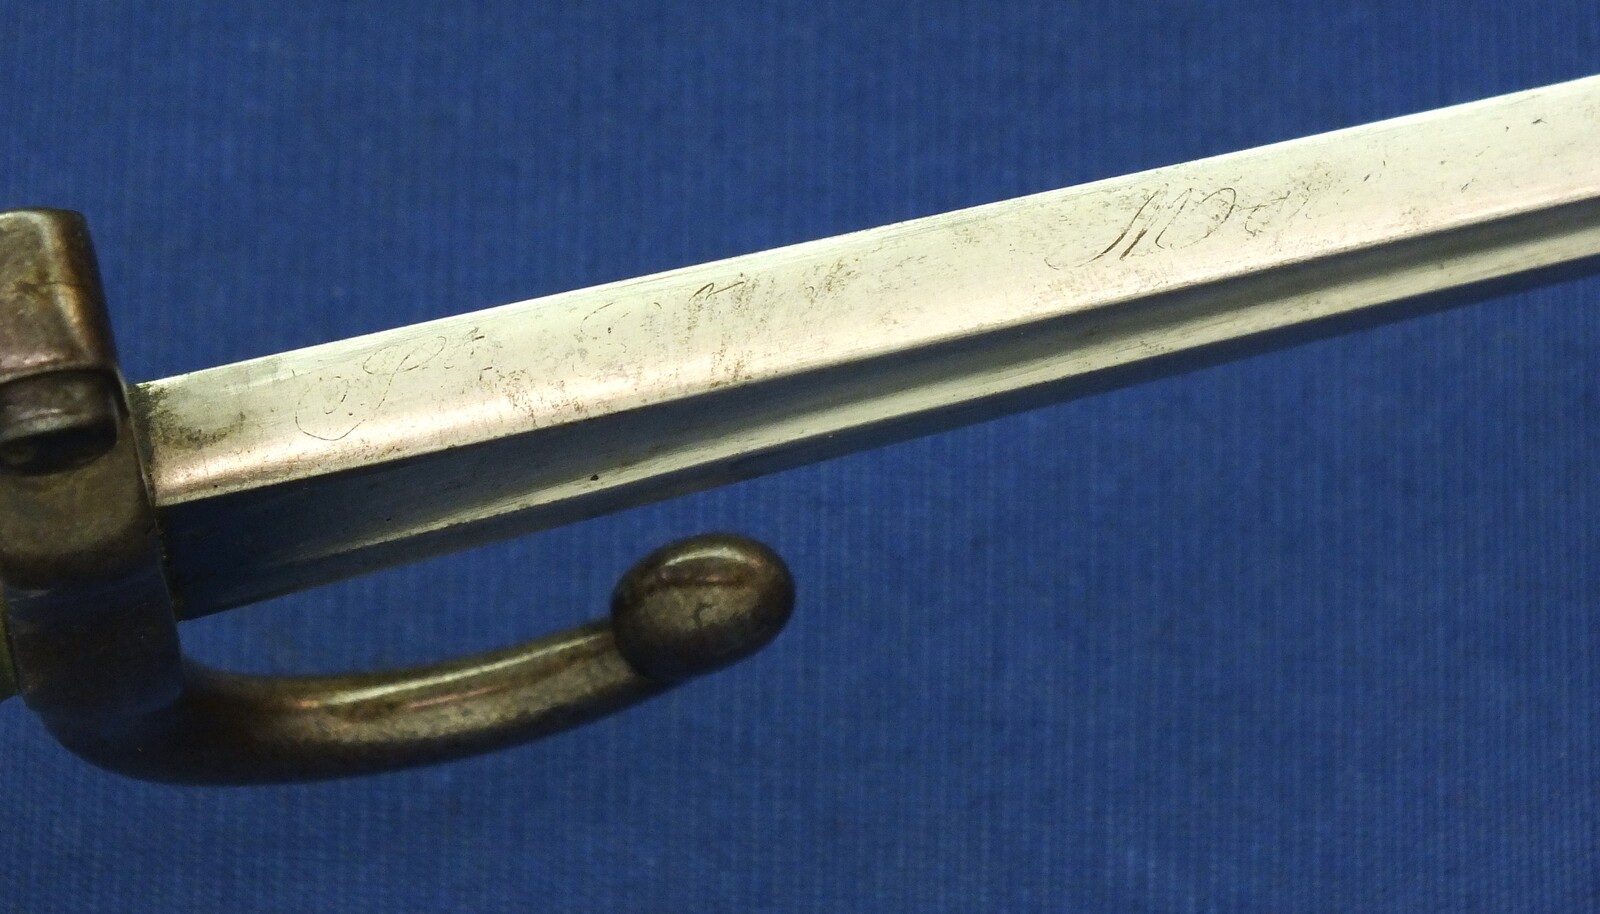 An antique French Model 1866 Chassepot Bayonet. St. Etienne March 18.., SN 58215 with matching numbered scabbard. Length 71cm. In very good condition. Price 275 euro